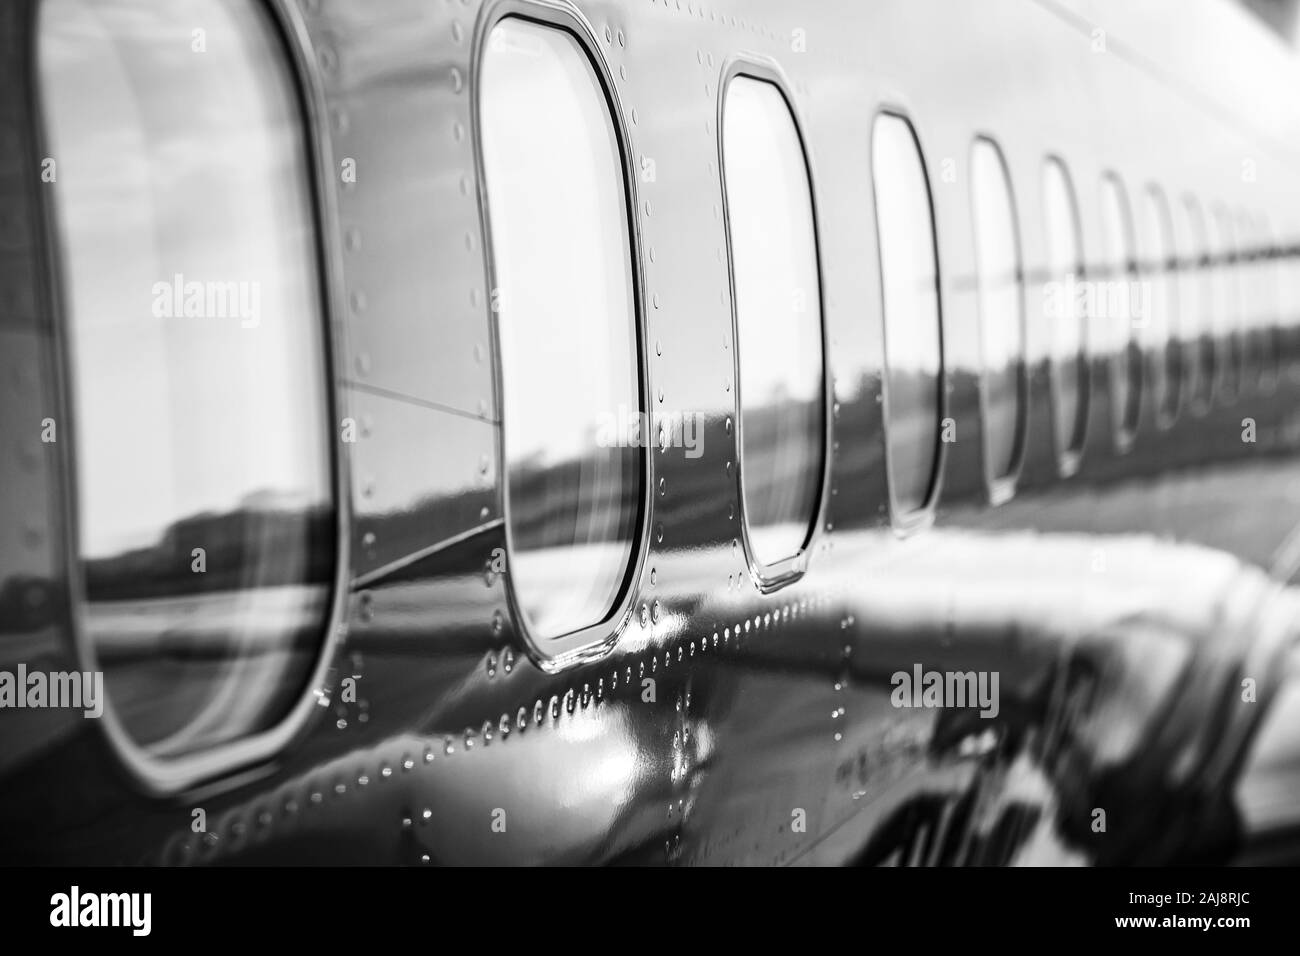 Close up on the fuselage of the commercial airplane, jetliner body casing. Stock Photo